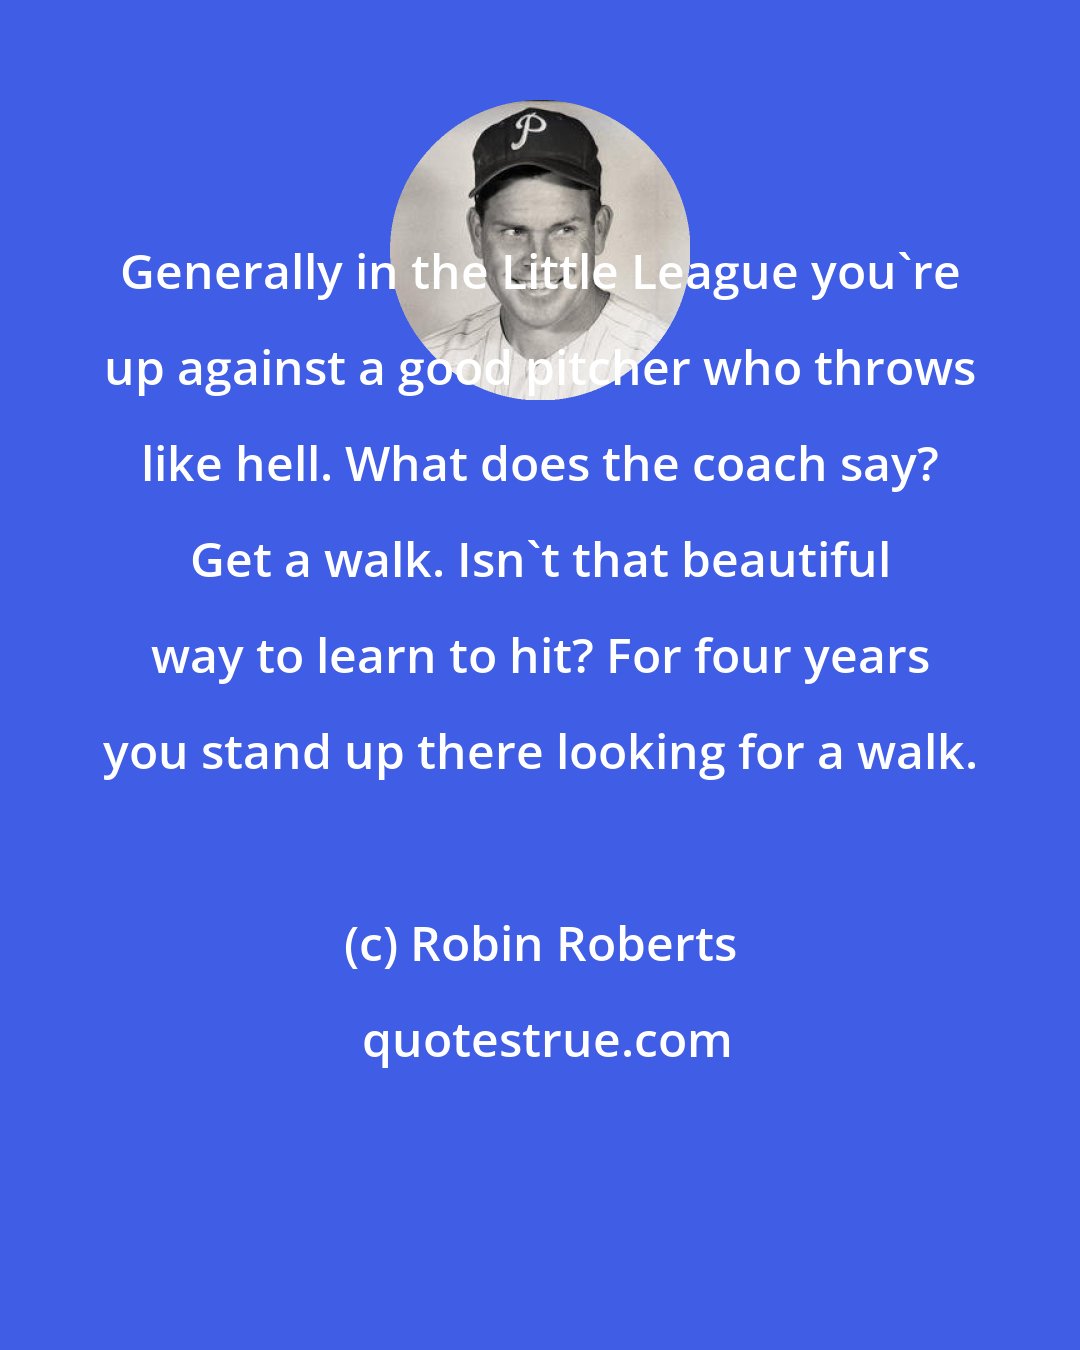 Robin Roberts: Generally in the Little League you're up against a good pitcher who throws like hell. What does the coach say? Get a walk. Isn't that beautiful way to learn to hit? For four years you stand up there looking for a walk.